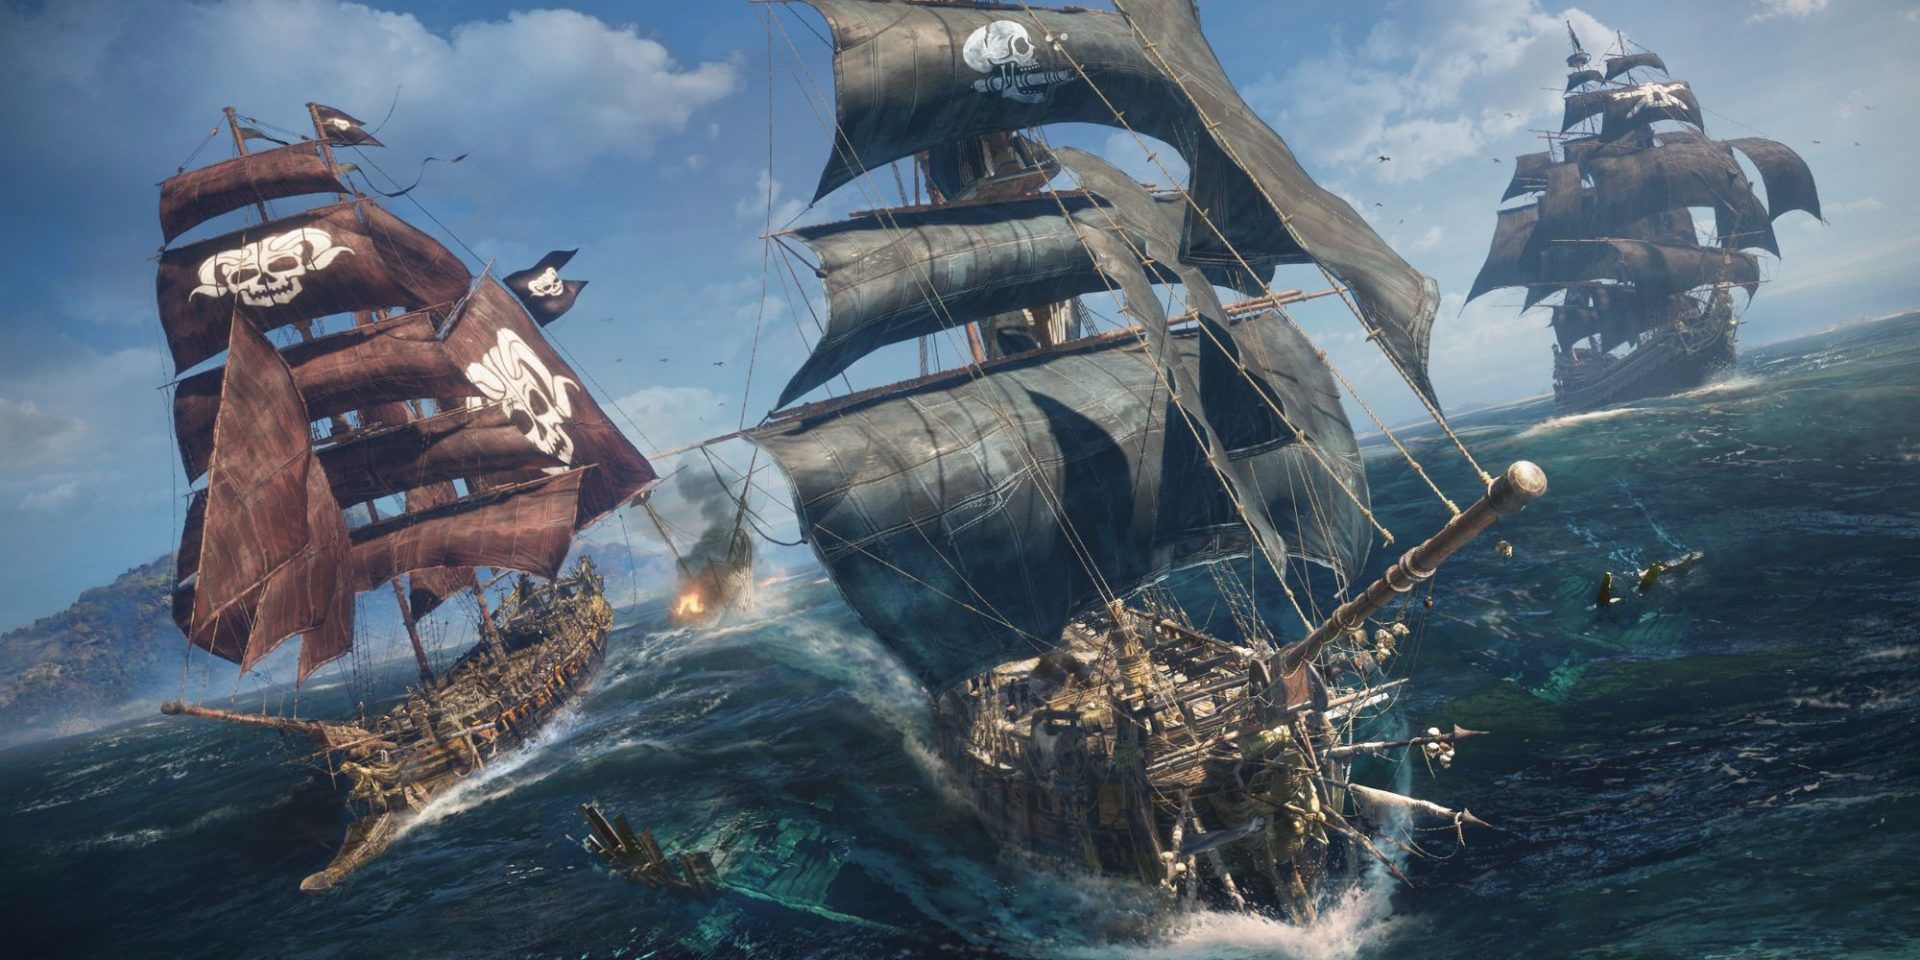 A screenshot from the upcoming Skull & Bones by Ubisoft Singapore.